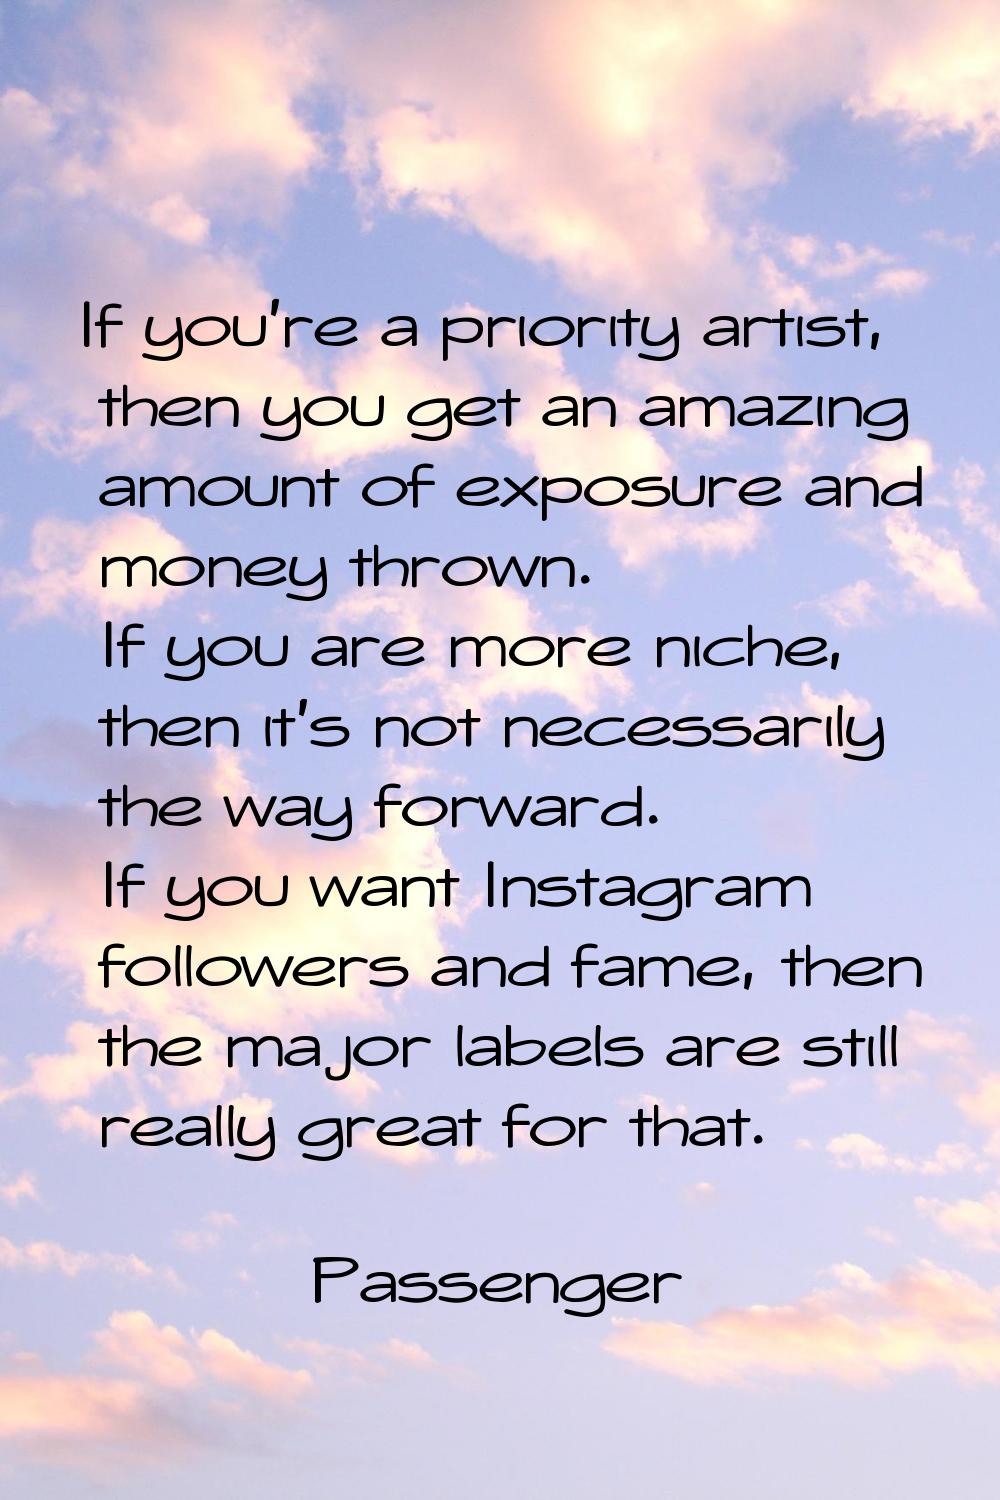 If you're a priority artist, then you get an amazing amount of exposure and money thrown. If you ar